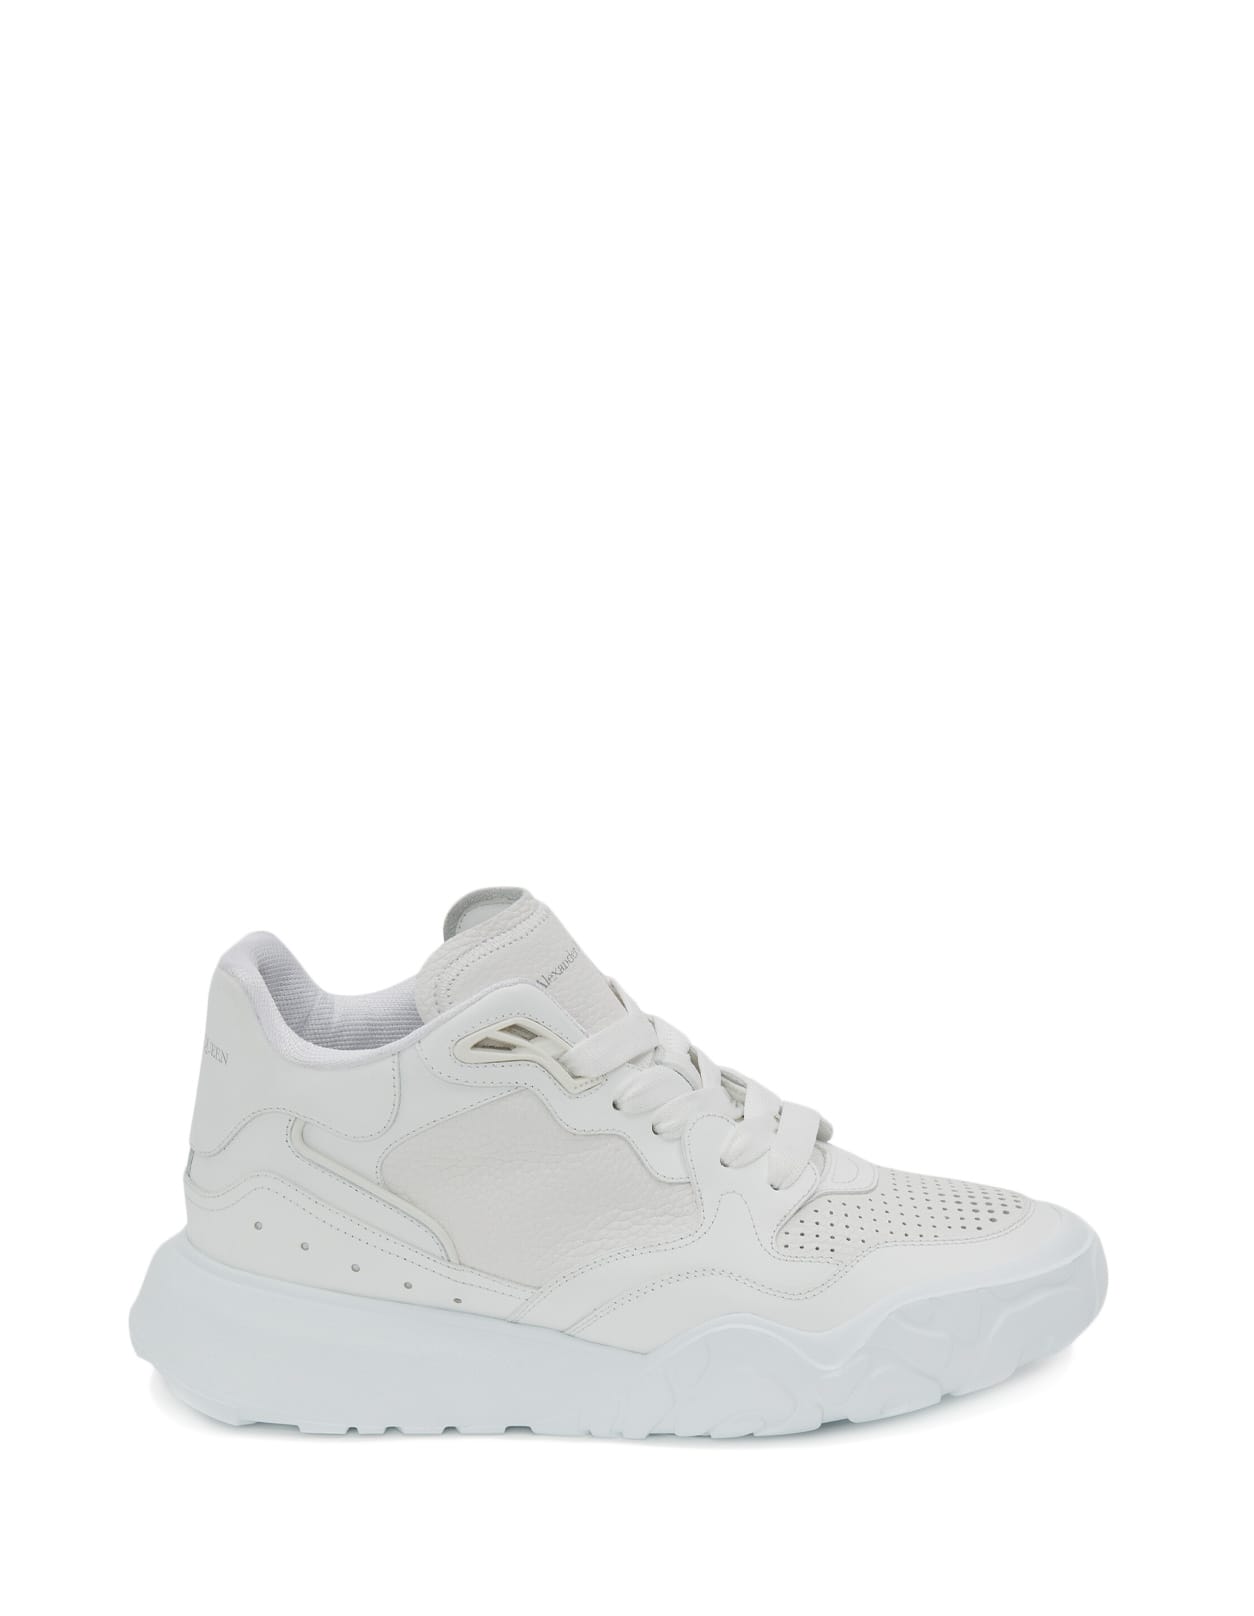 ALEXANDER MCQUEEN MAN WHITE AND SILVER COURT trainers